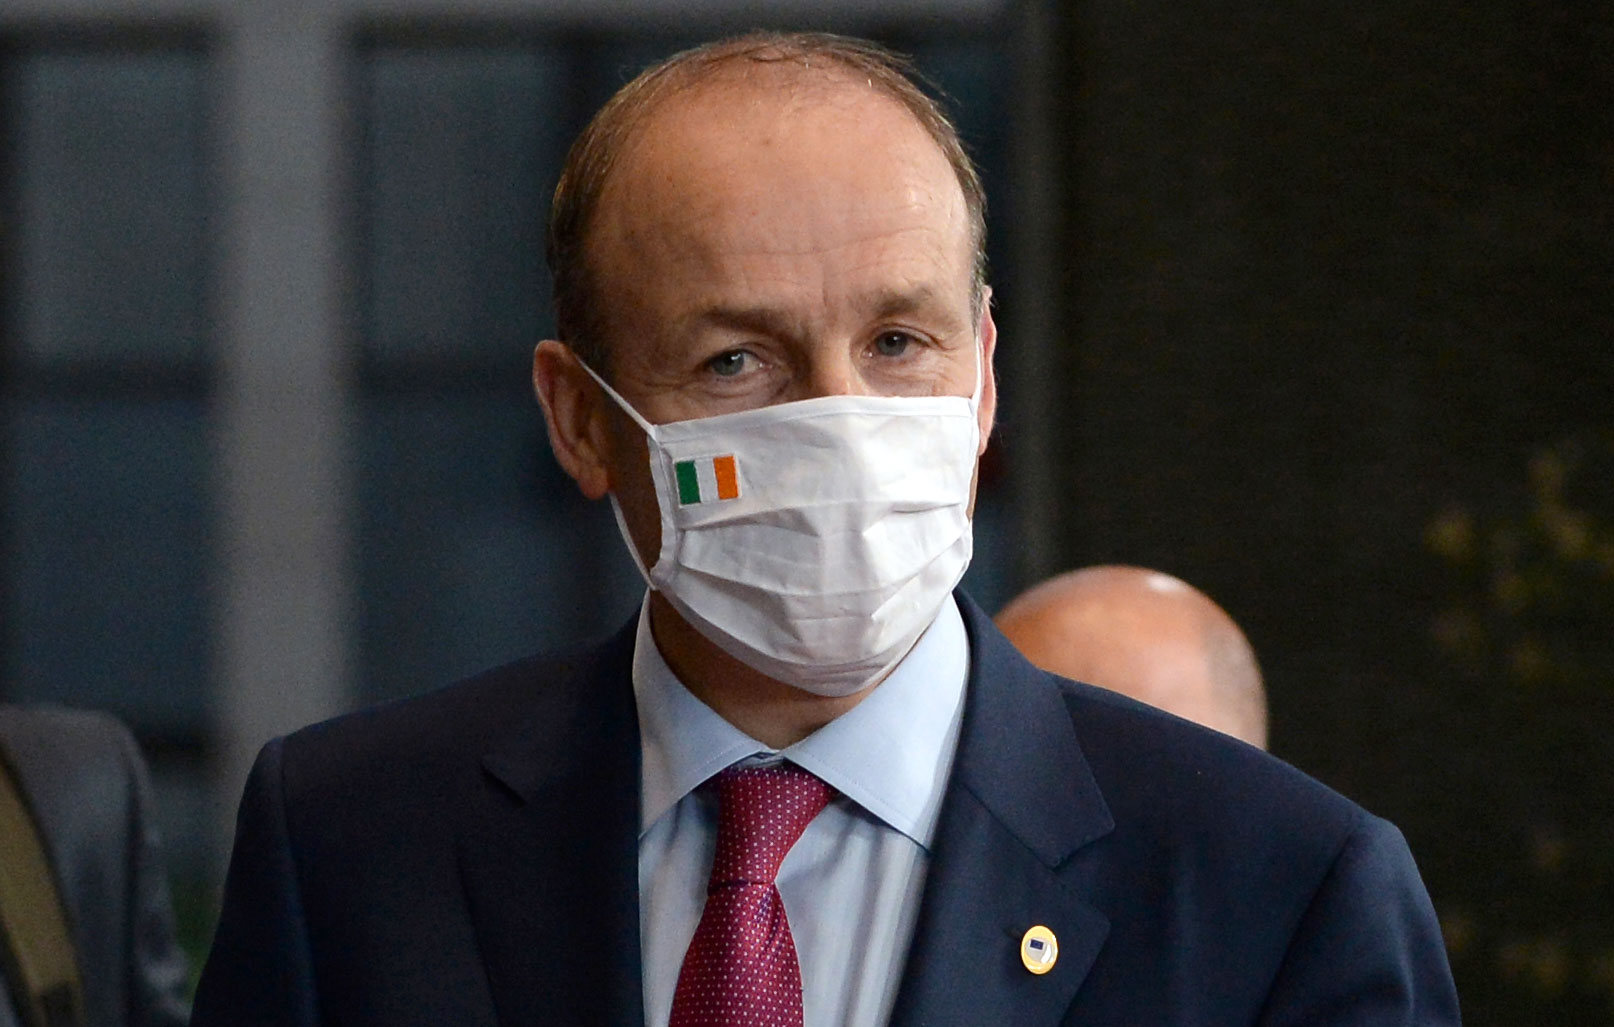 Ireland Prime Minister Micheál Martin attends a roundtable discussion at the European Council in Brussels, Belgium, on July 21.